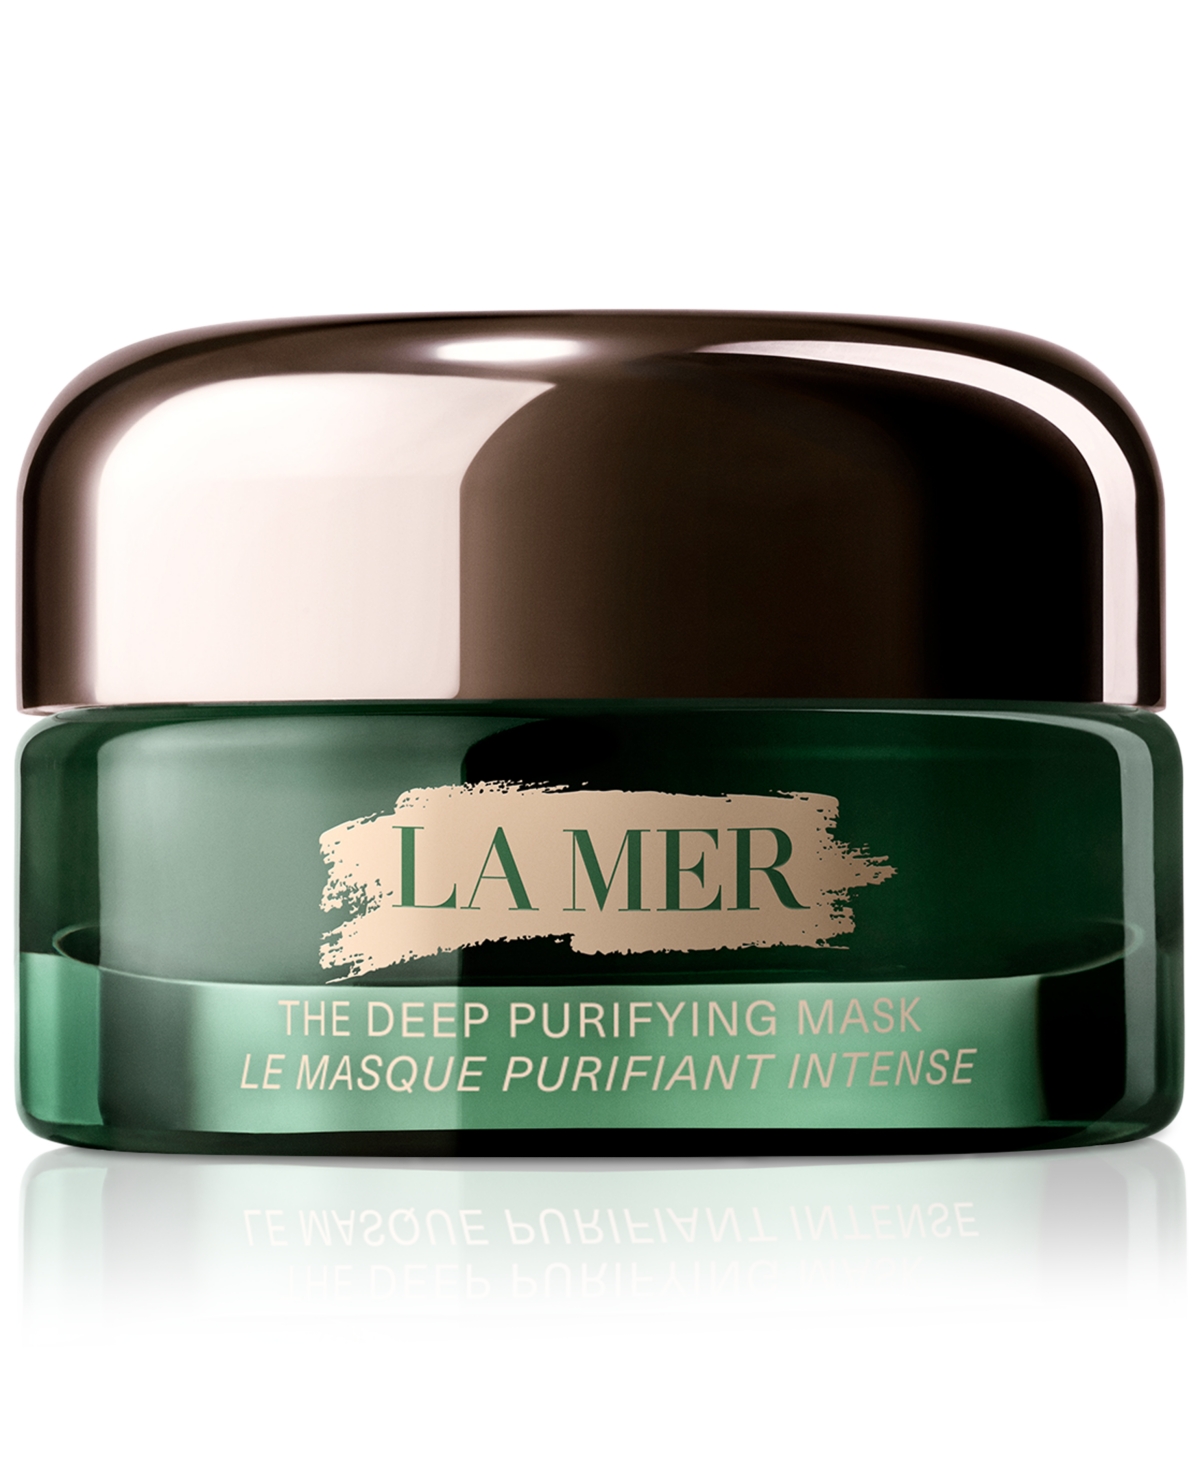 La Mer The Deep Purifying Mask, 1.7 Oz. In White